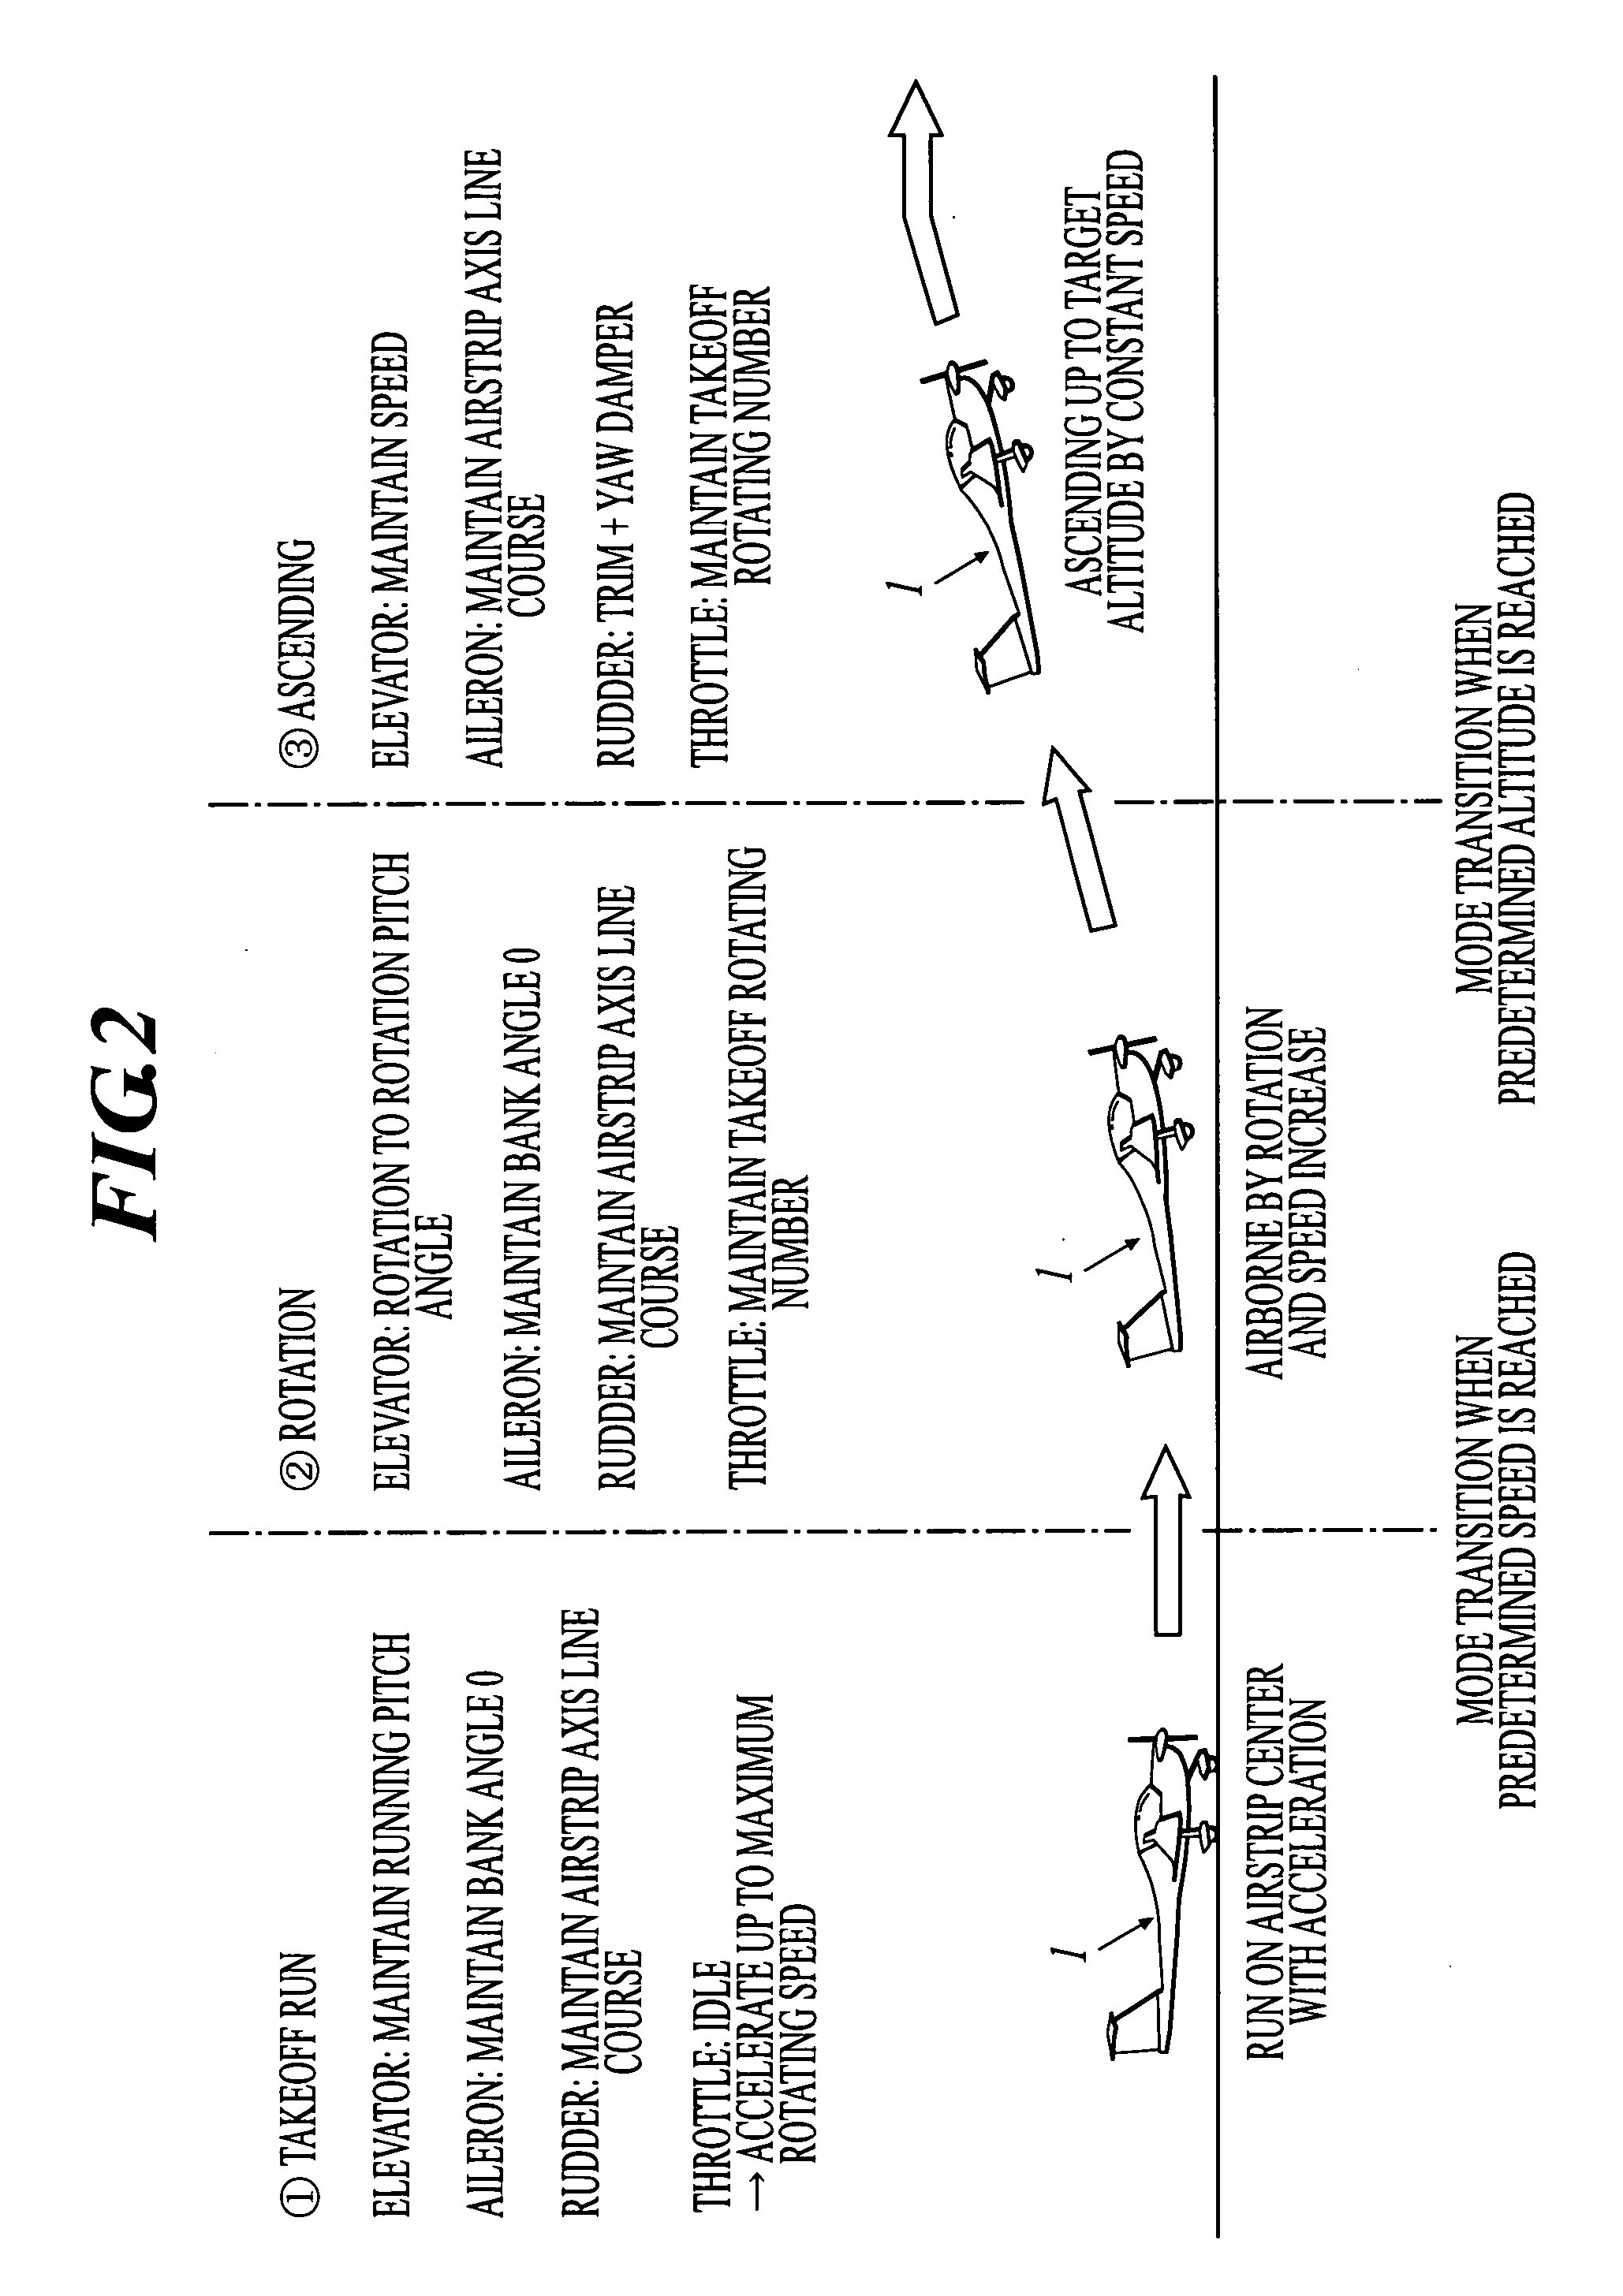 Automatic takeoff apparatus for aircraft, automatic landing apparatus for aircraft, automatic takeoff and landing apparatus for aircraft, automatic takeoff method for aircraft, automatic landing method for aircraft and automatic takeoff and landing method for aircraft